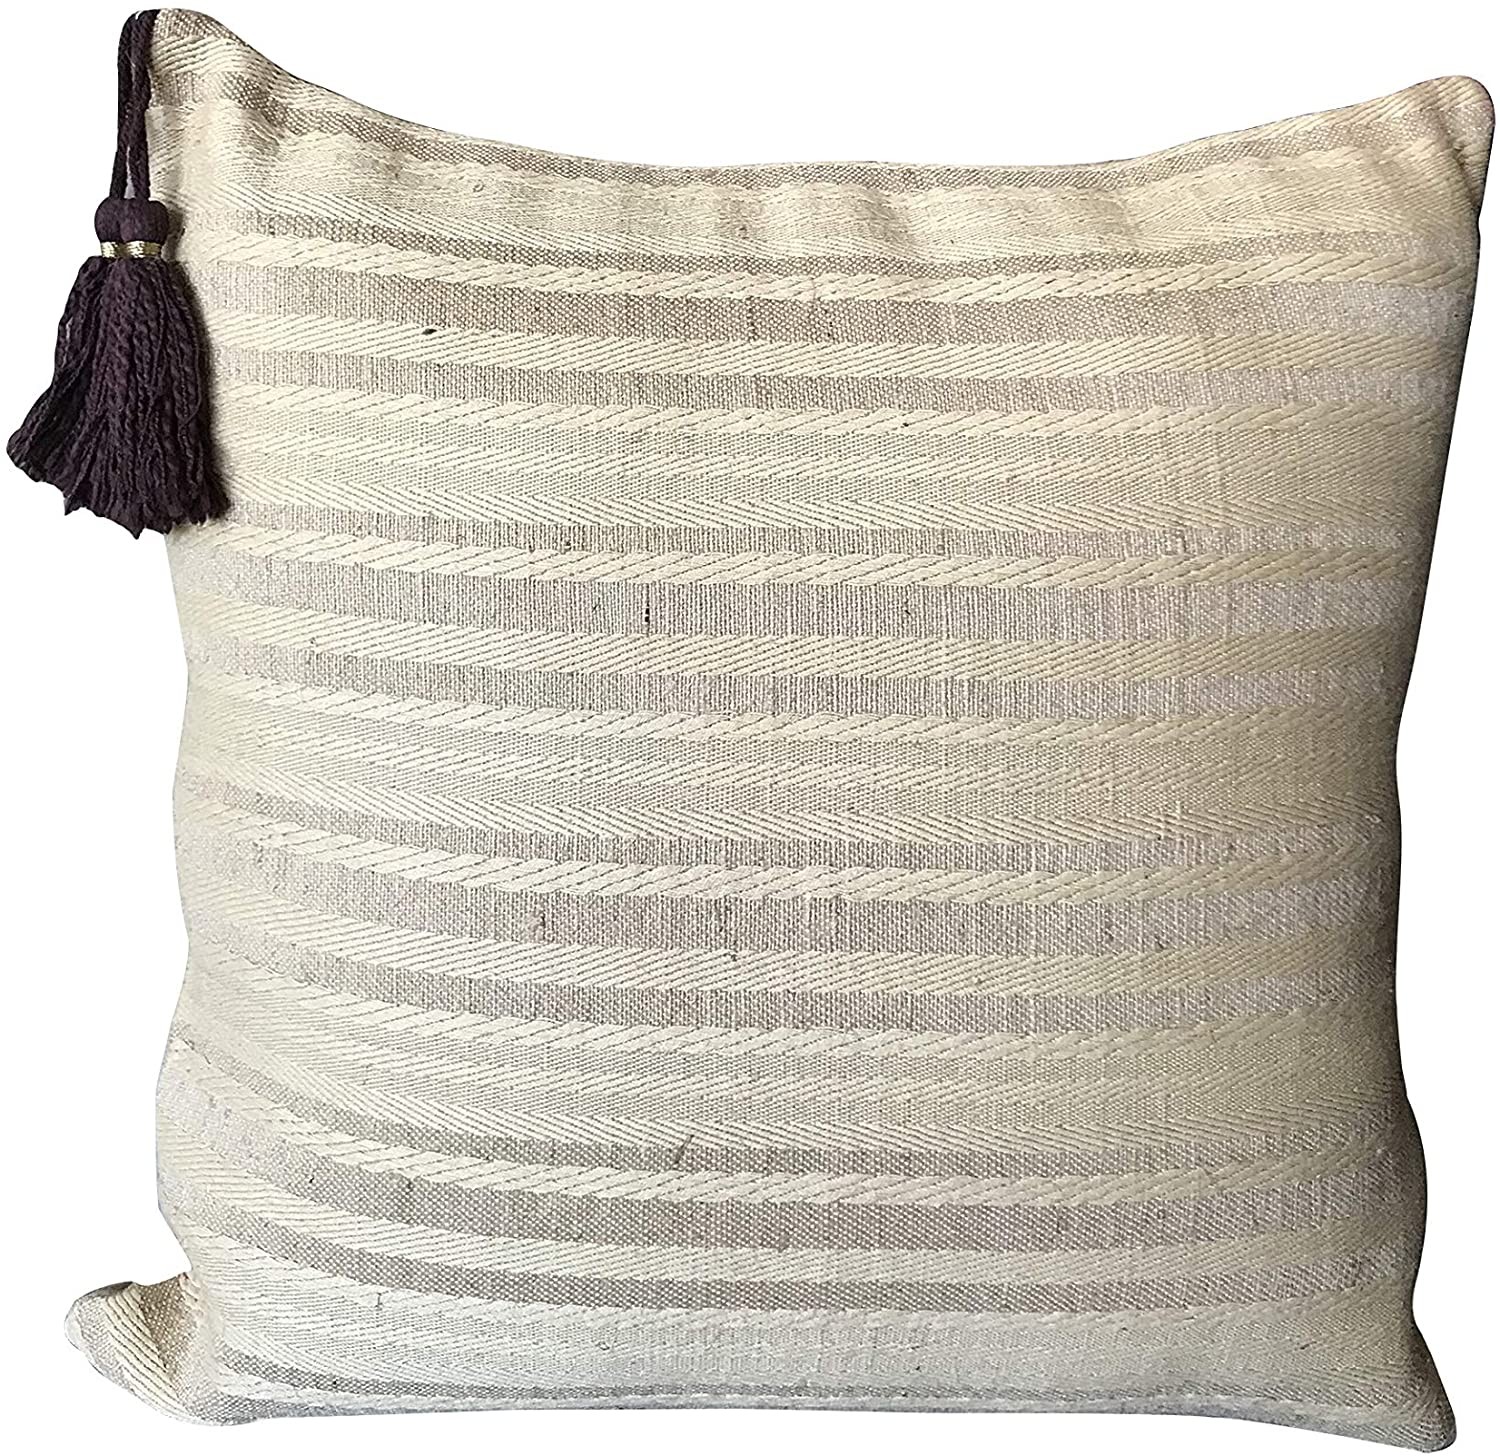 Throw Pillow Cover Tribal Boho Woven Pillowcase with Tassels Soft ...